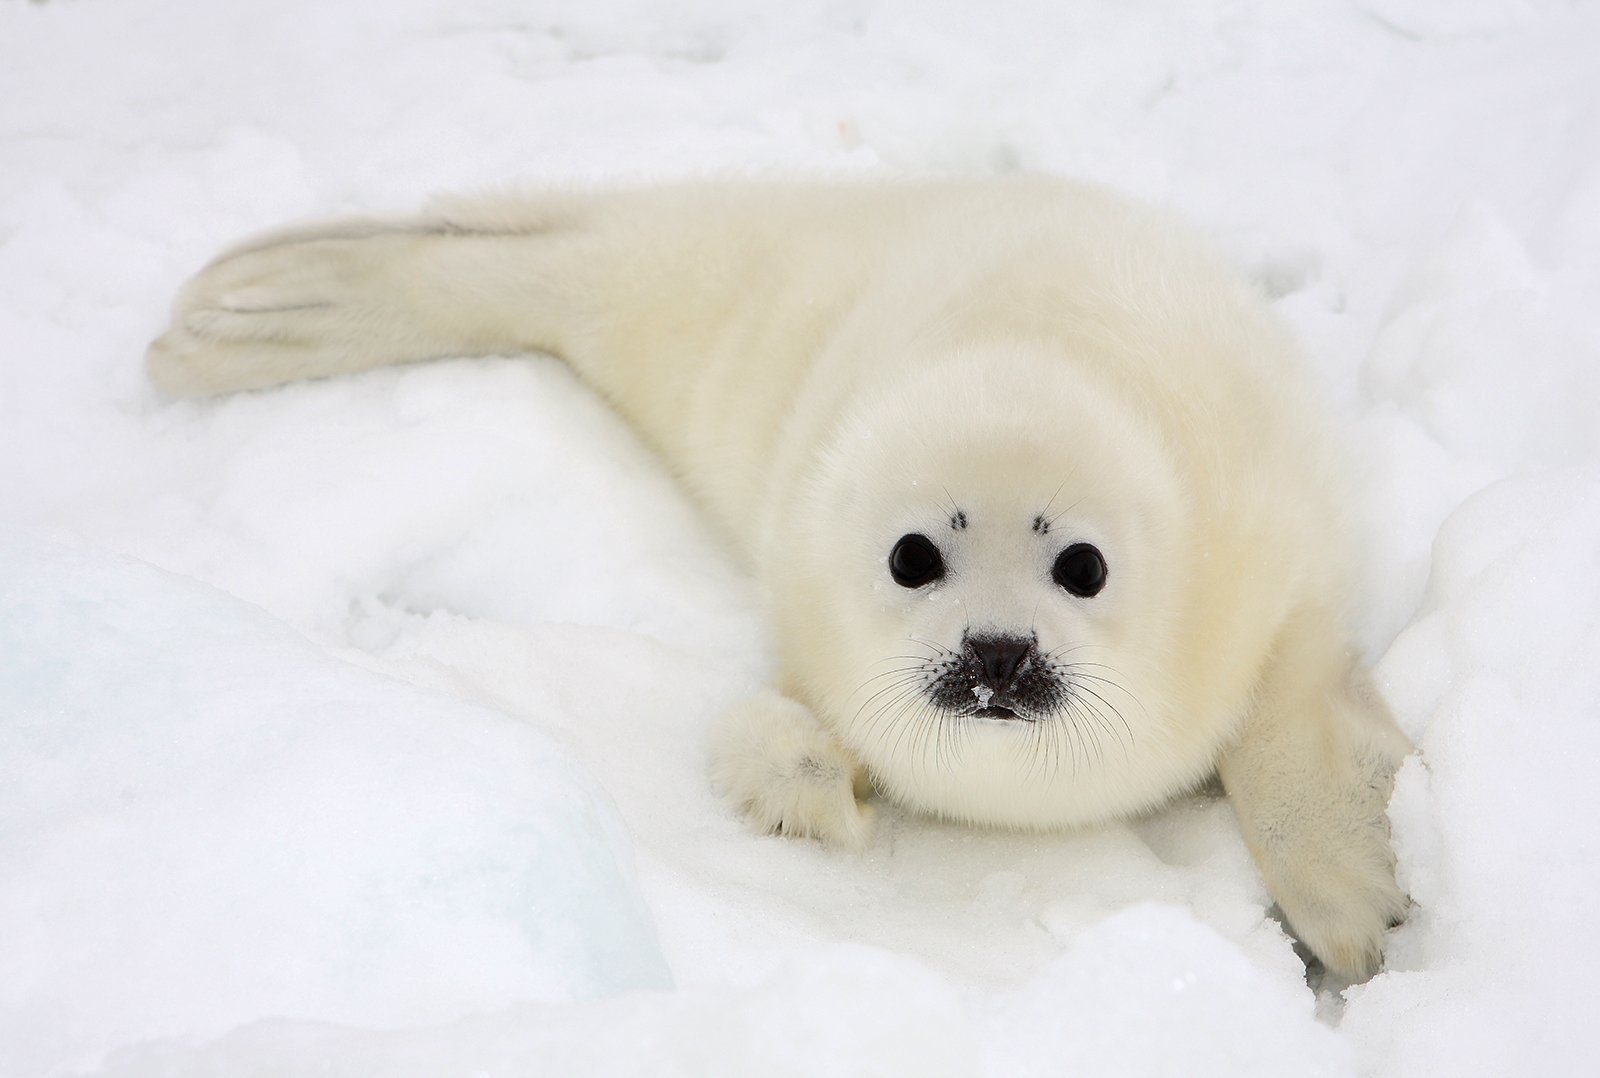 Harp Seal  Facts, pictures & more about Harp Seals